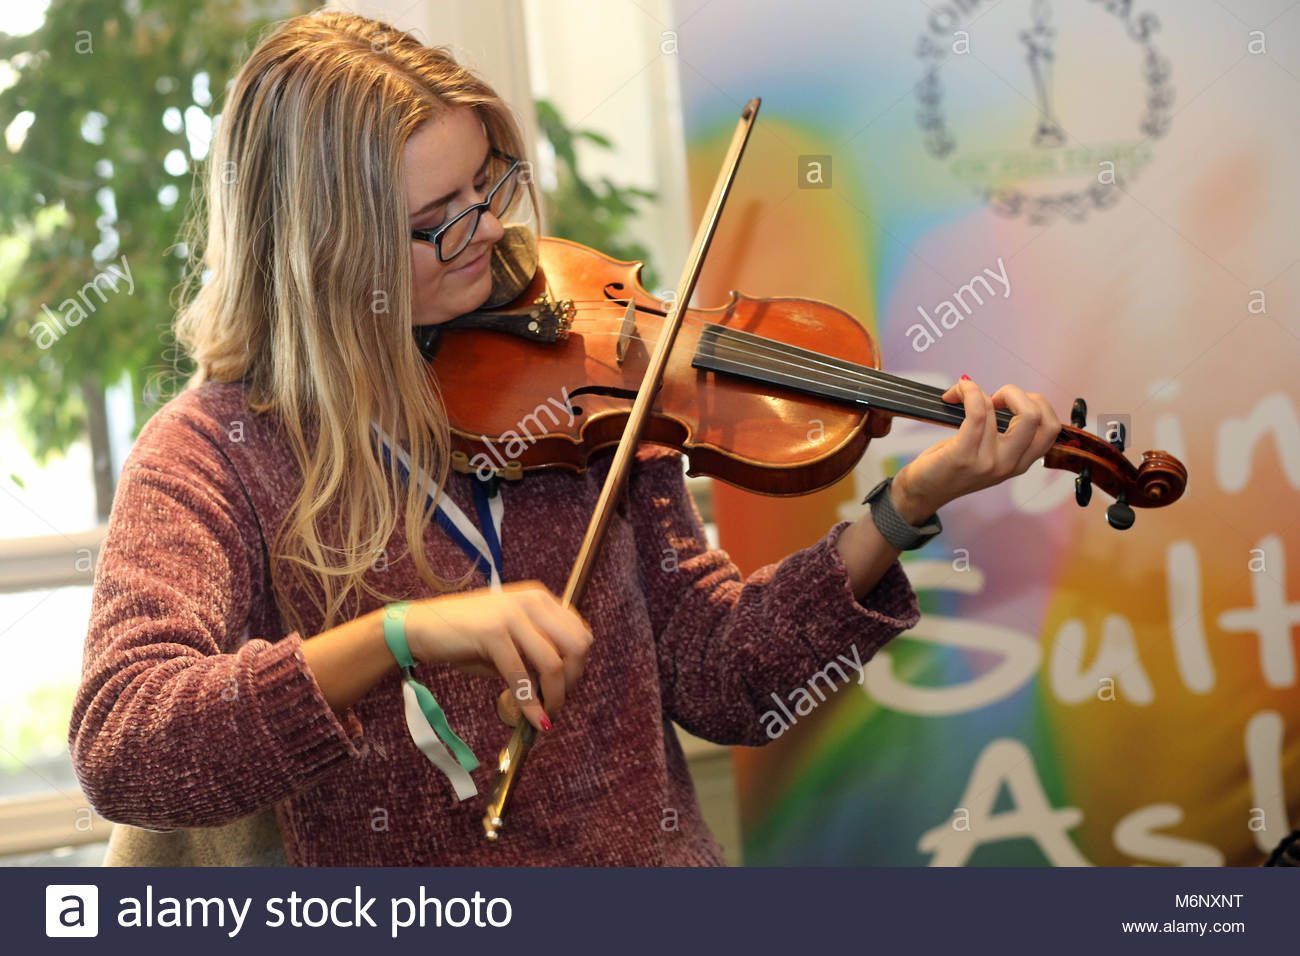 A participant at the Irish language and music festival in Killarney plays a tune on the fiddle. Stock Photo